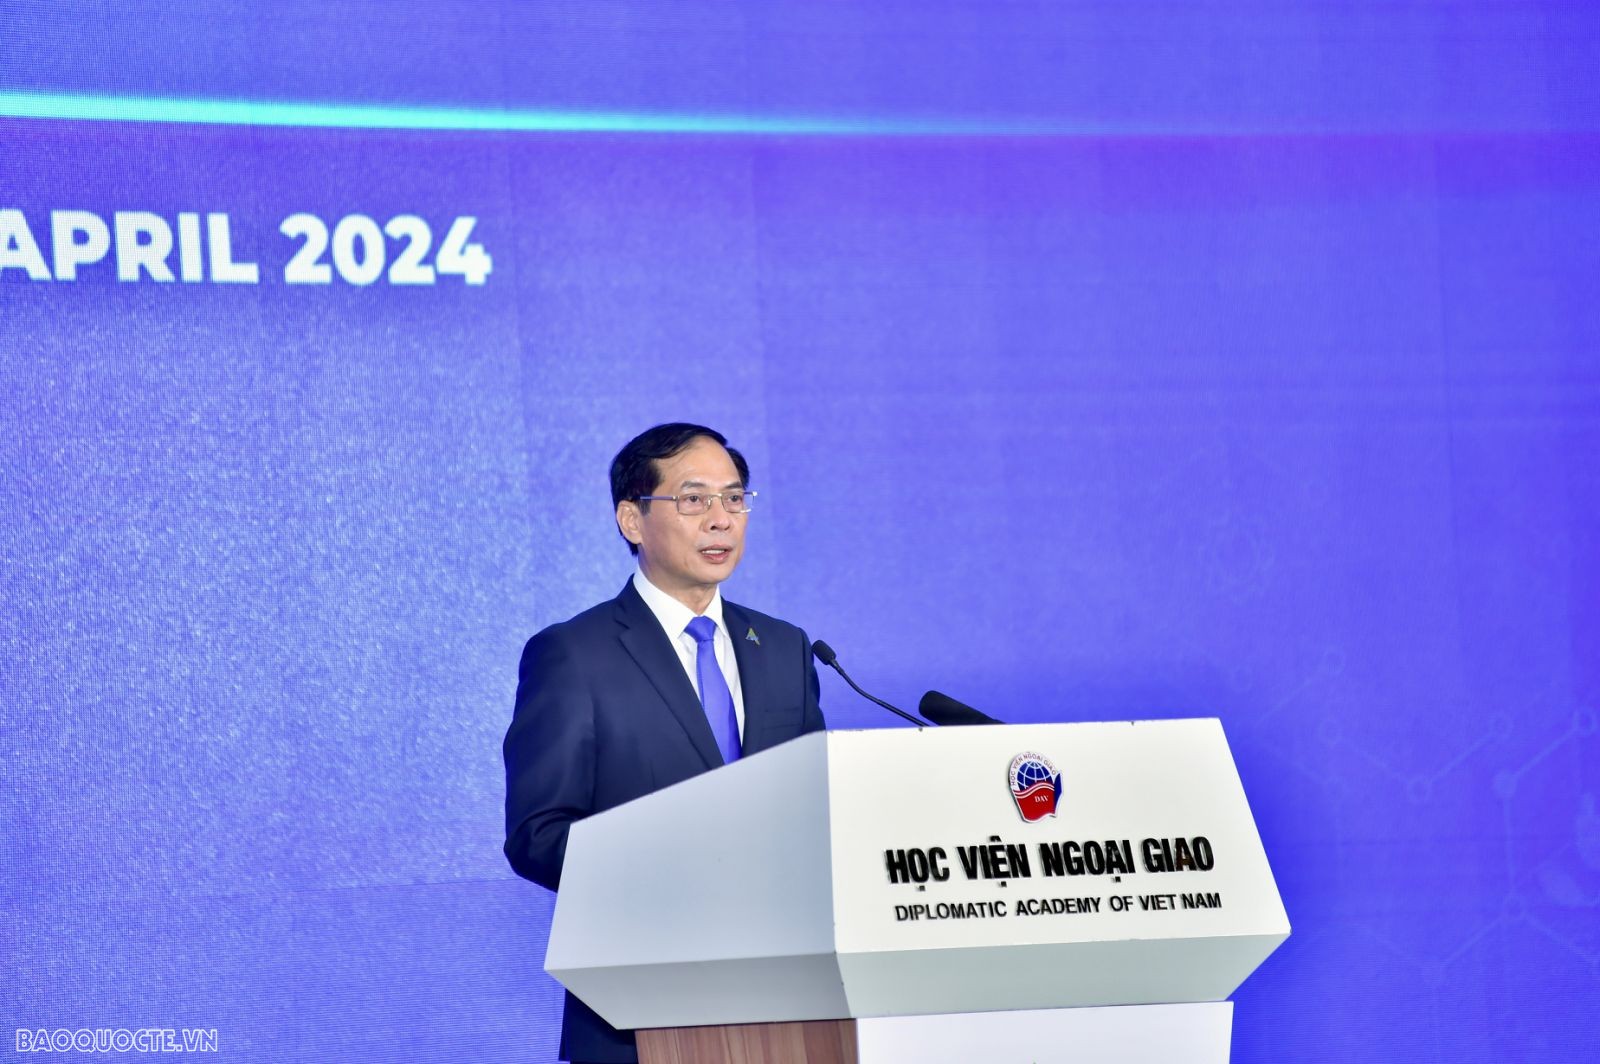 Full text of Foreign Minister Bui Thanh Son's speech at the ASEAN Future Forum 2024